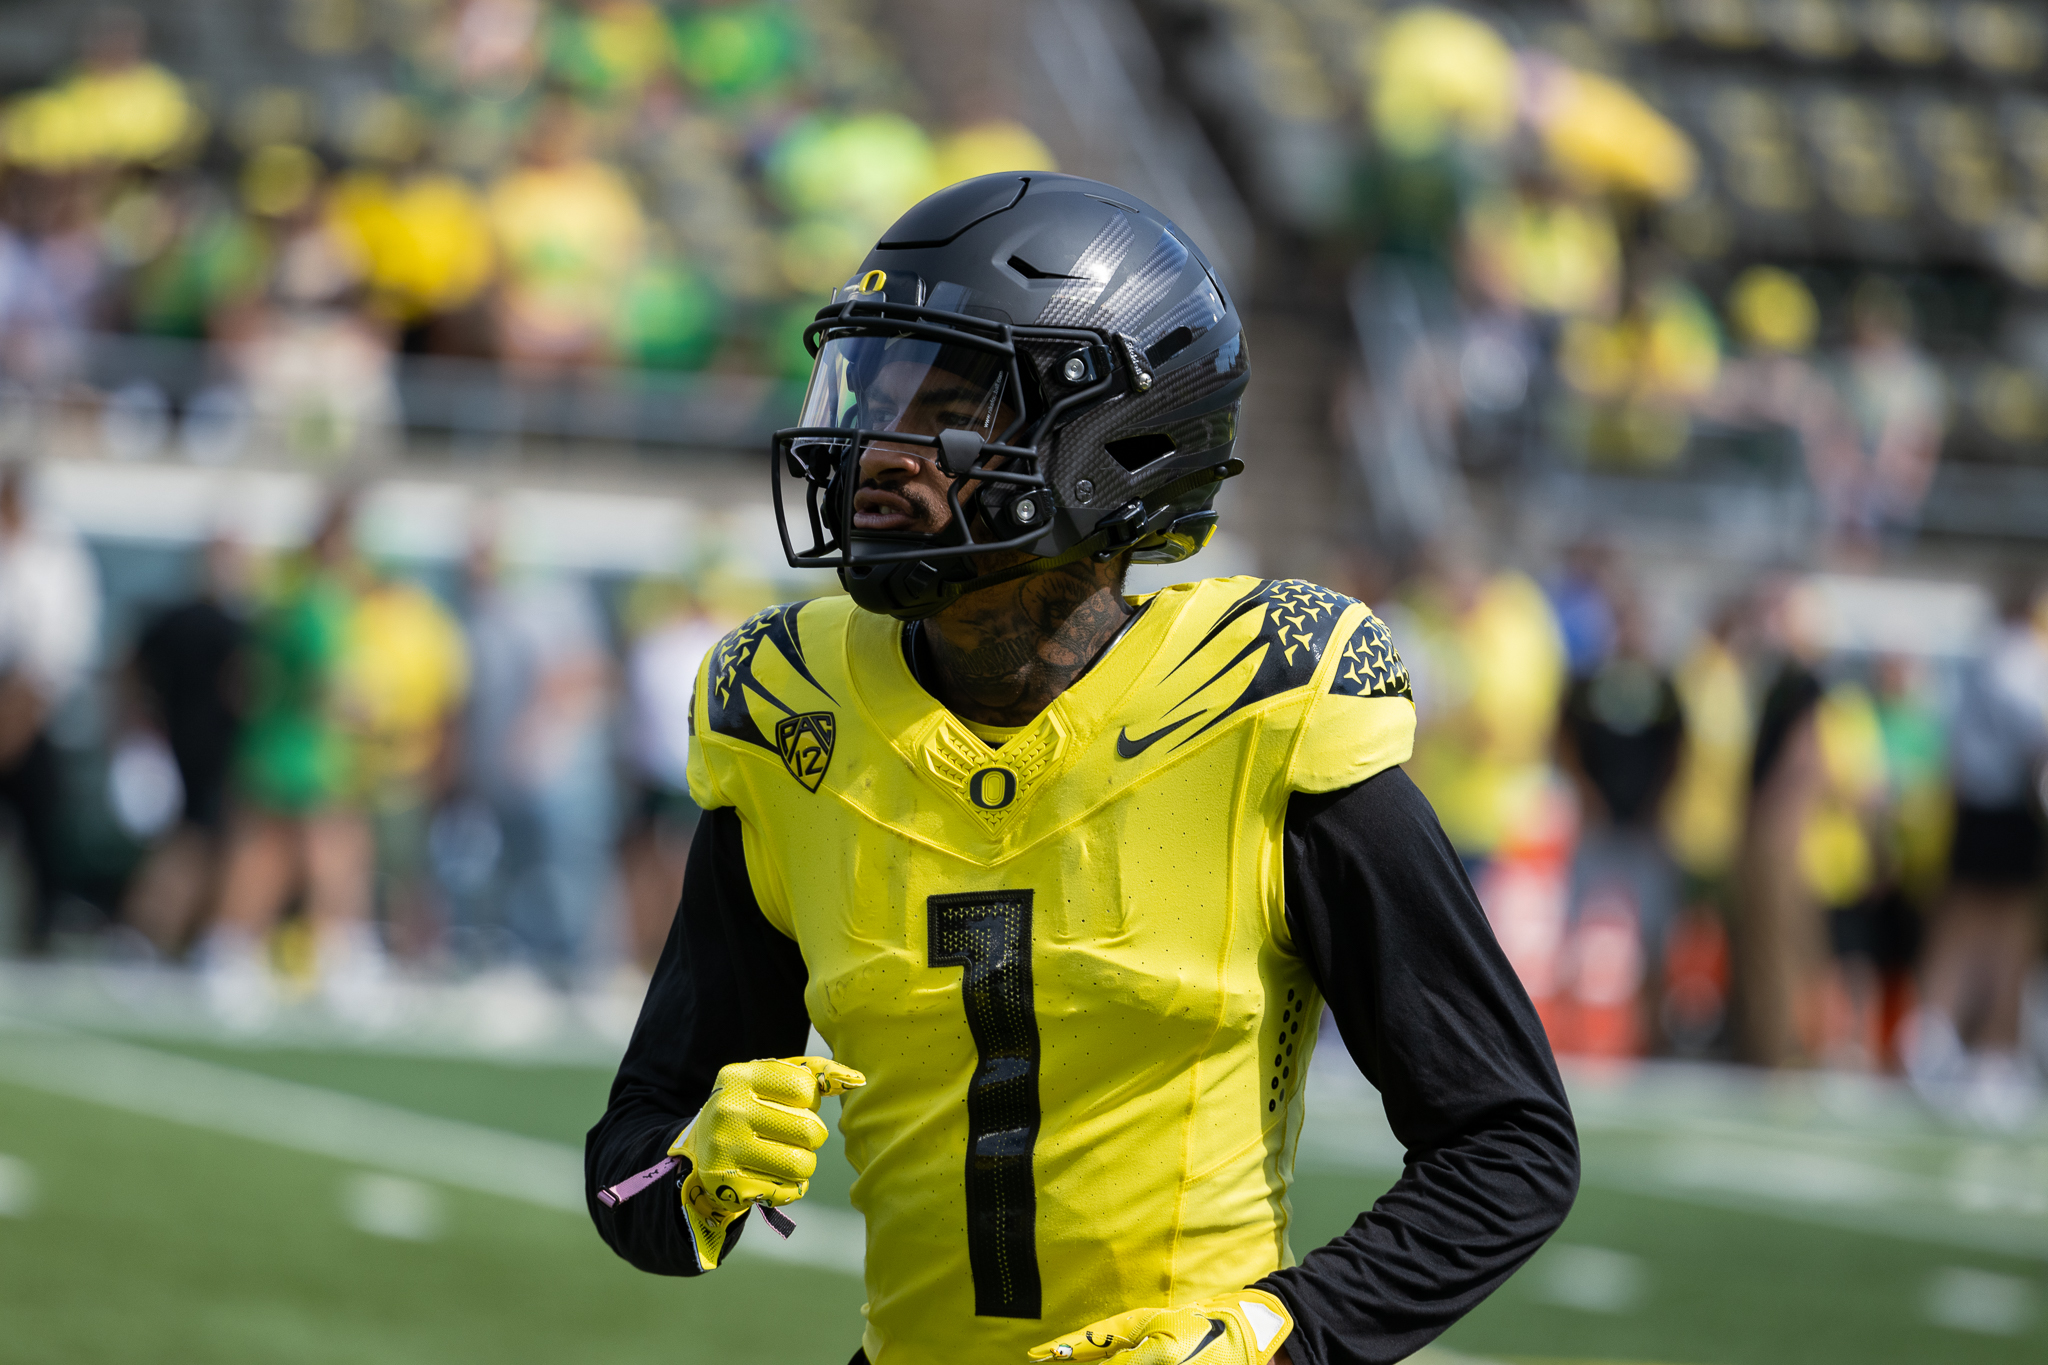 Oregon Ducks wide receiver Kris Hutson ahead of a game against the Portland State Vikings.